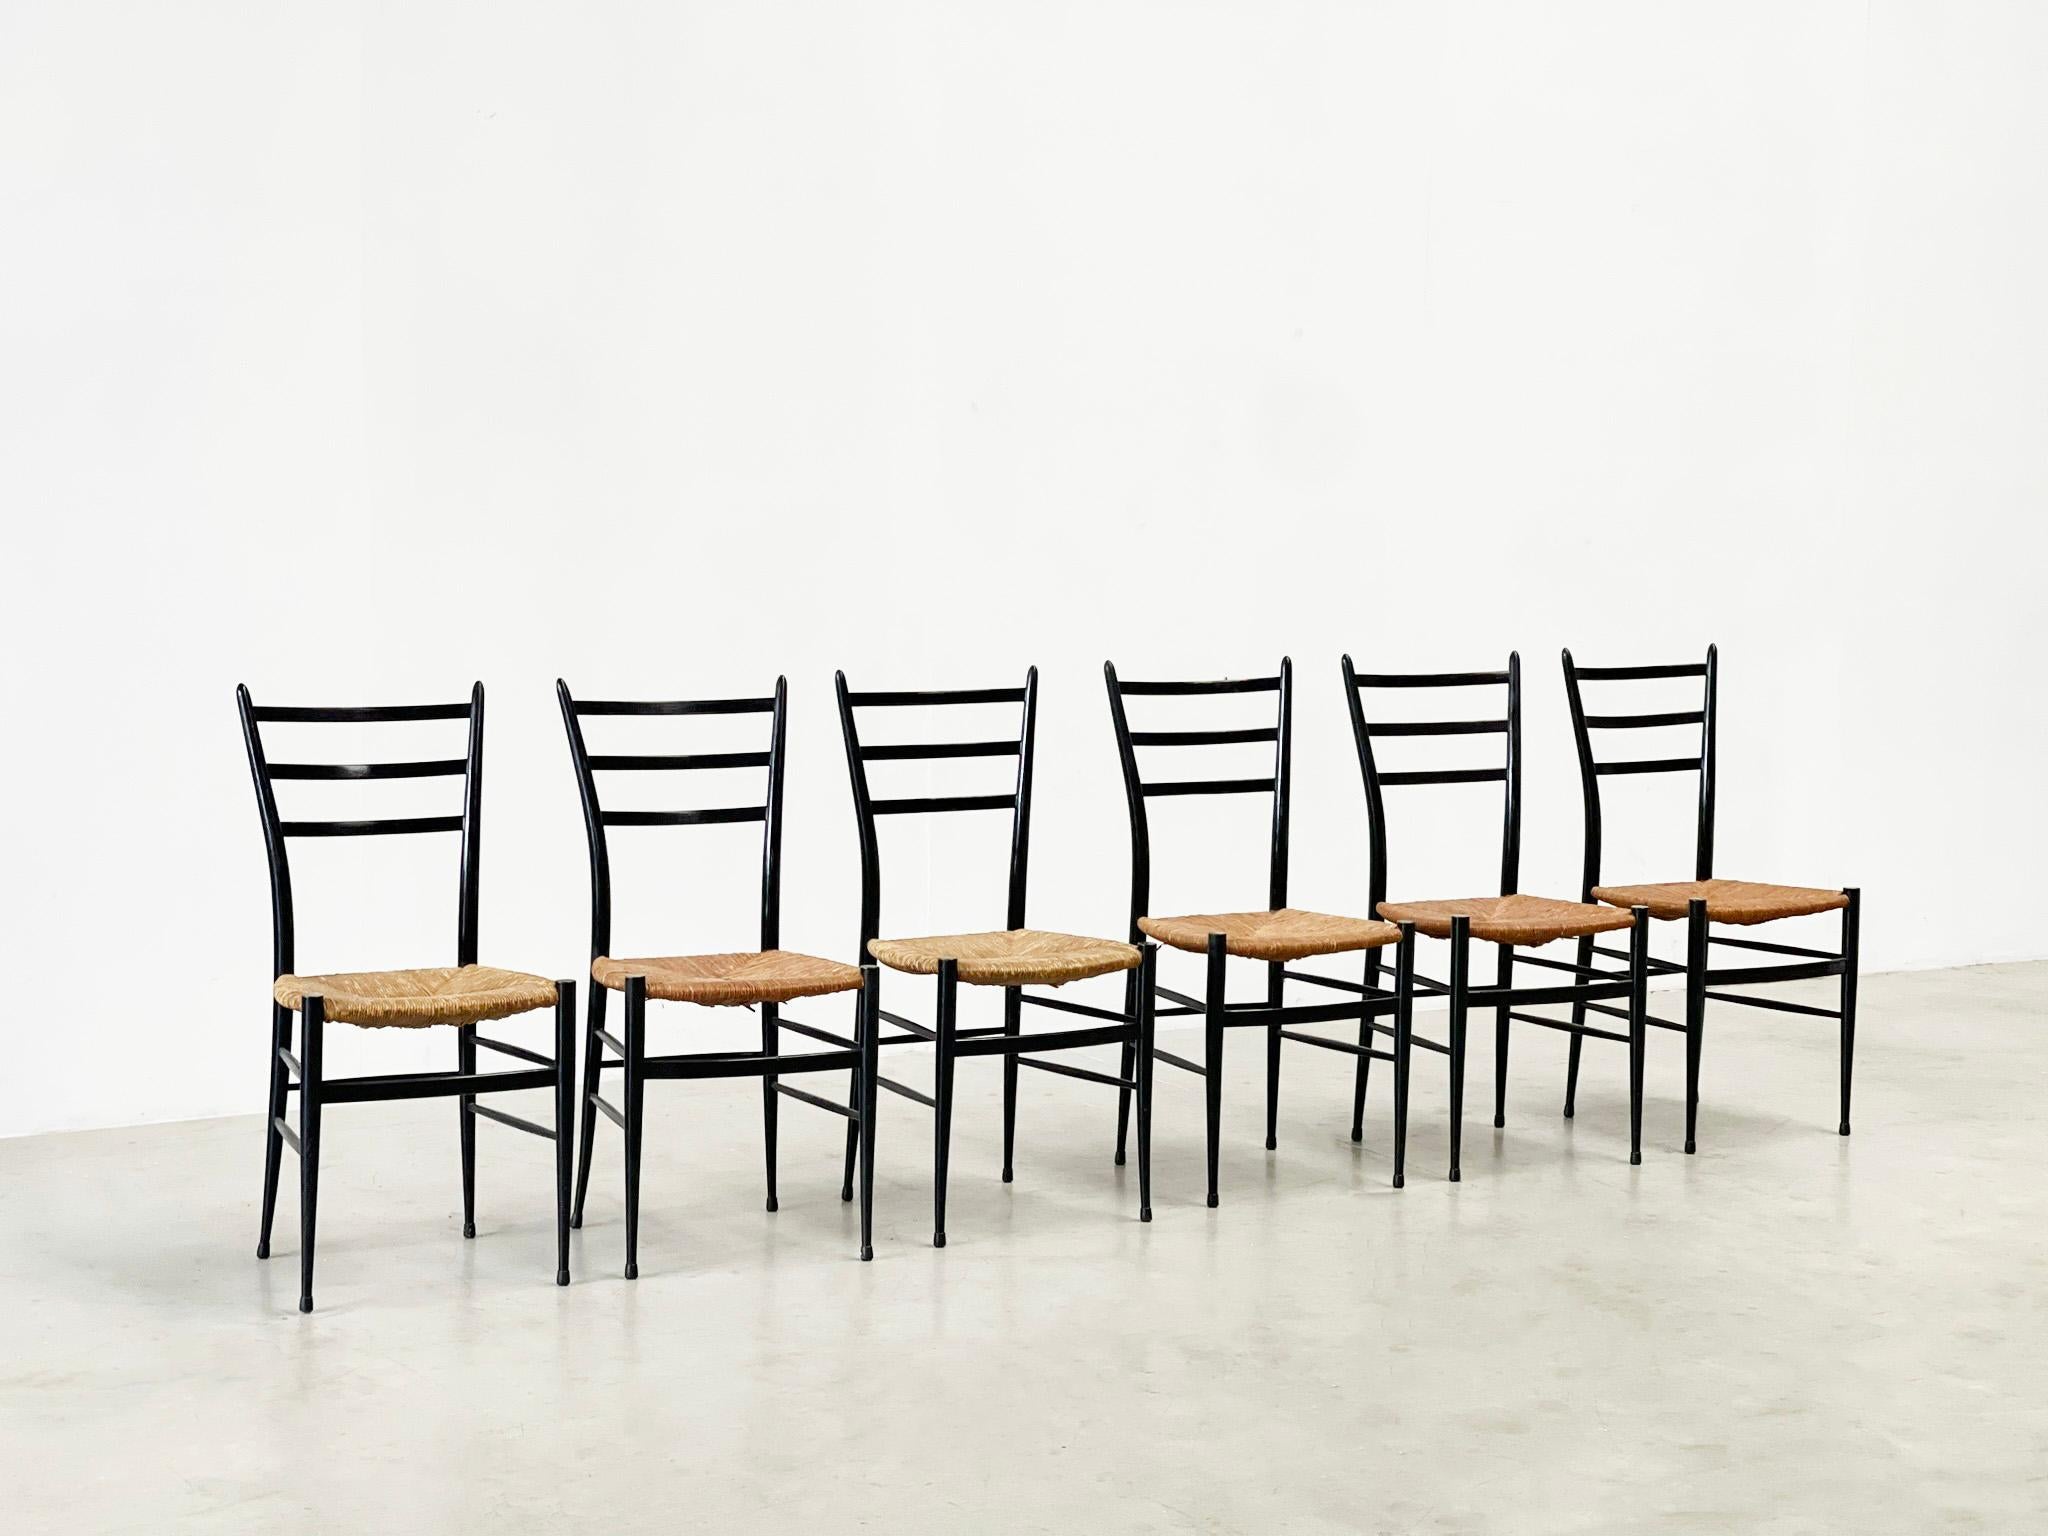 Beautiful set of 7 chiavari chairs with a black ebonize frame and a rattan seat. The chairs were designed by Giuseppe Gaetano Descalzi and produced since the early 1970's in the Ligurian town of Chiavari, Italy.

 

It is said that this chairs